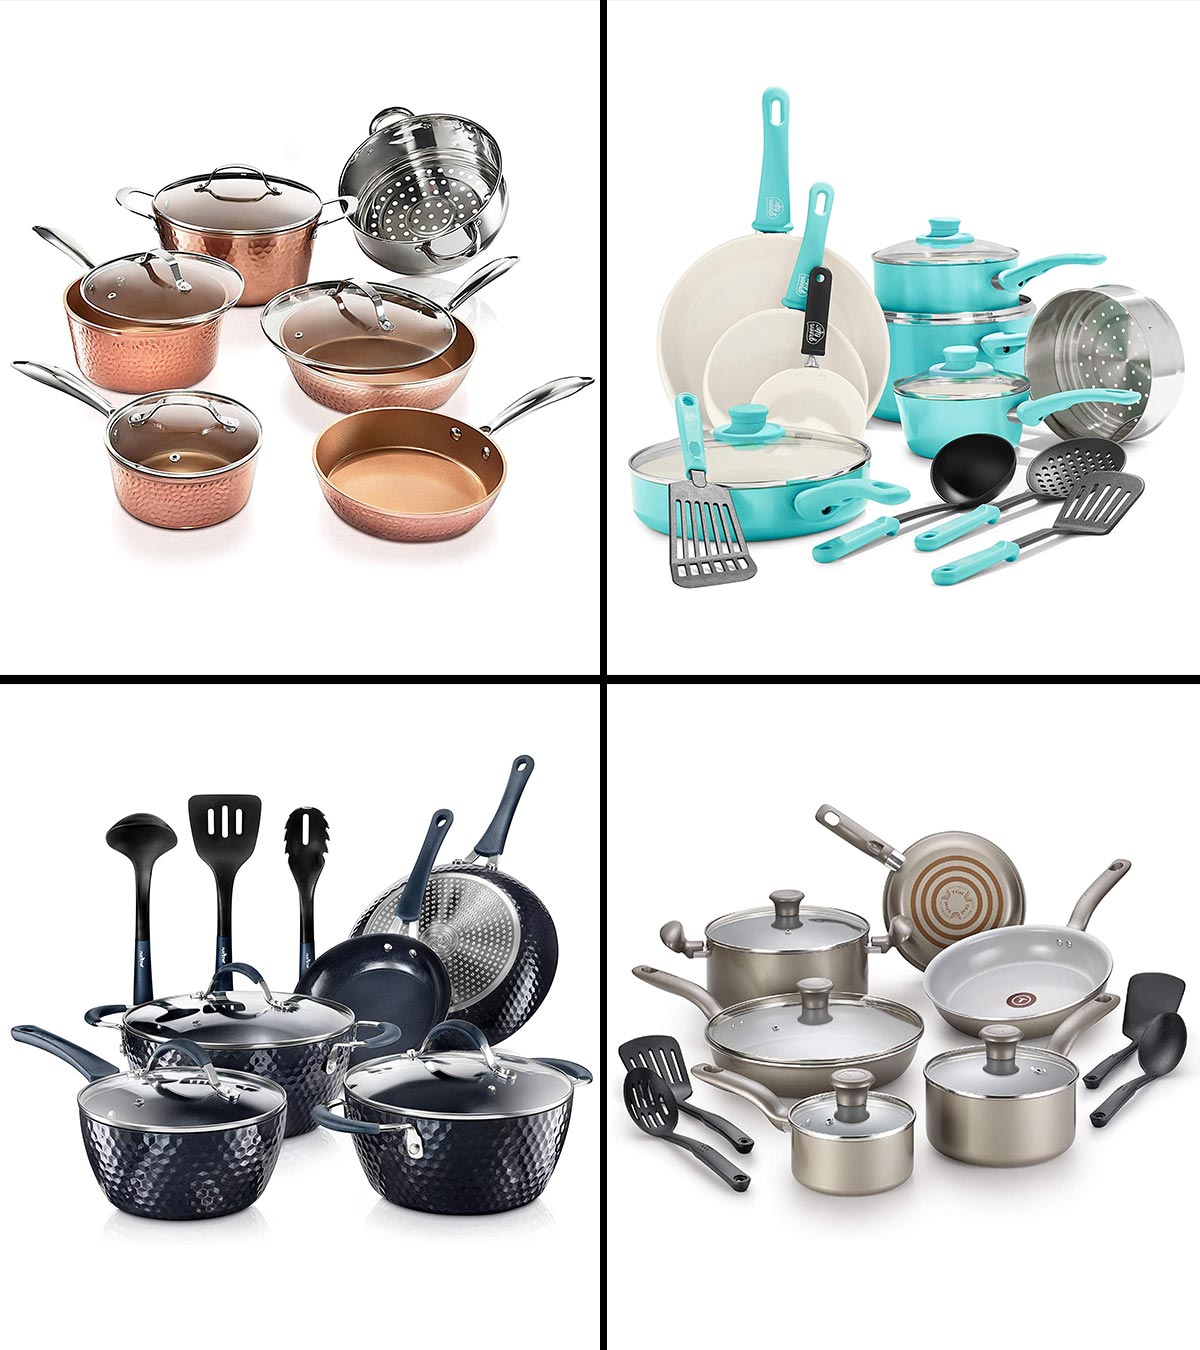 20 Best Non Toxic Cookware Sets For Healthy Cooking In 20